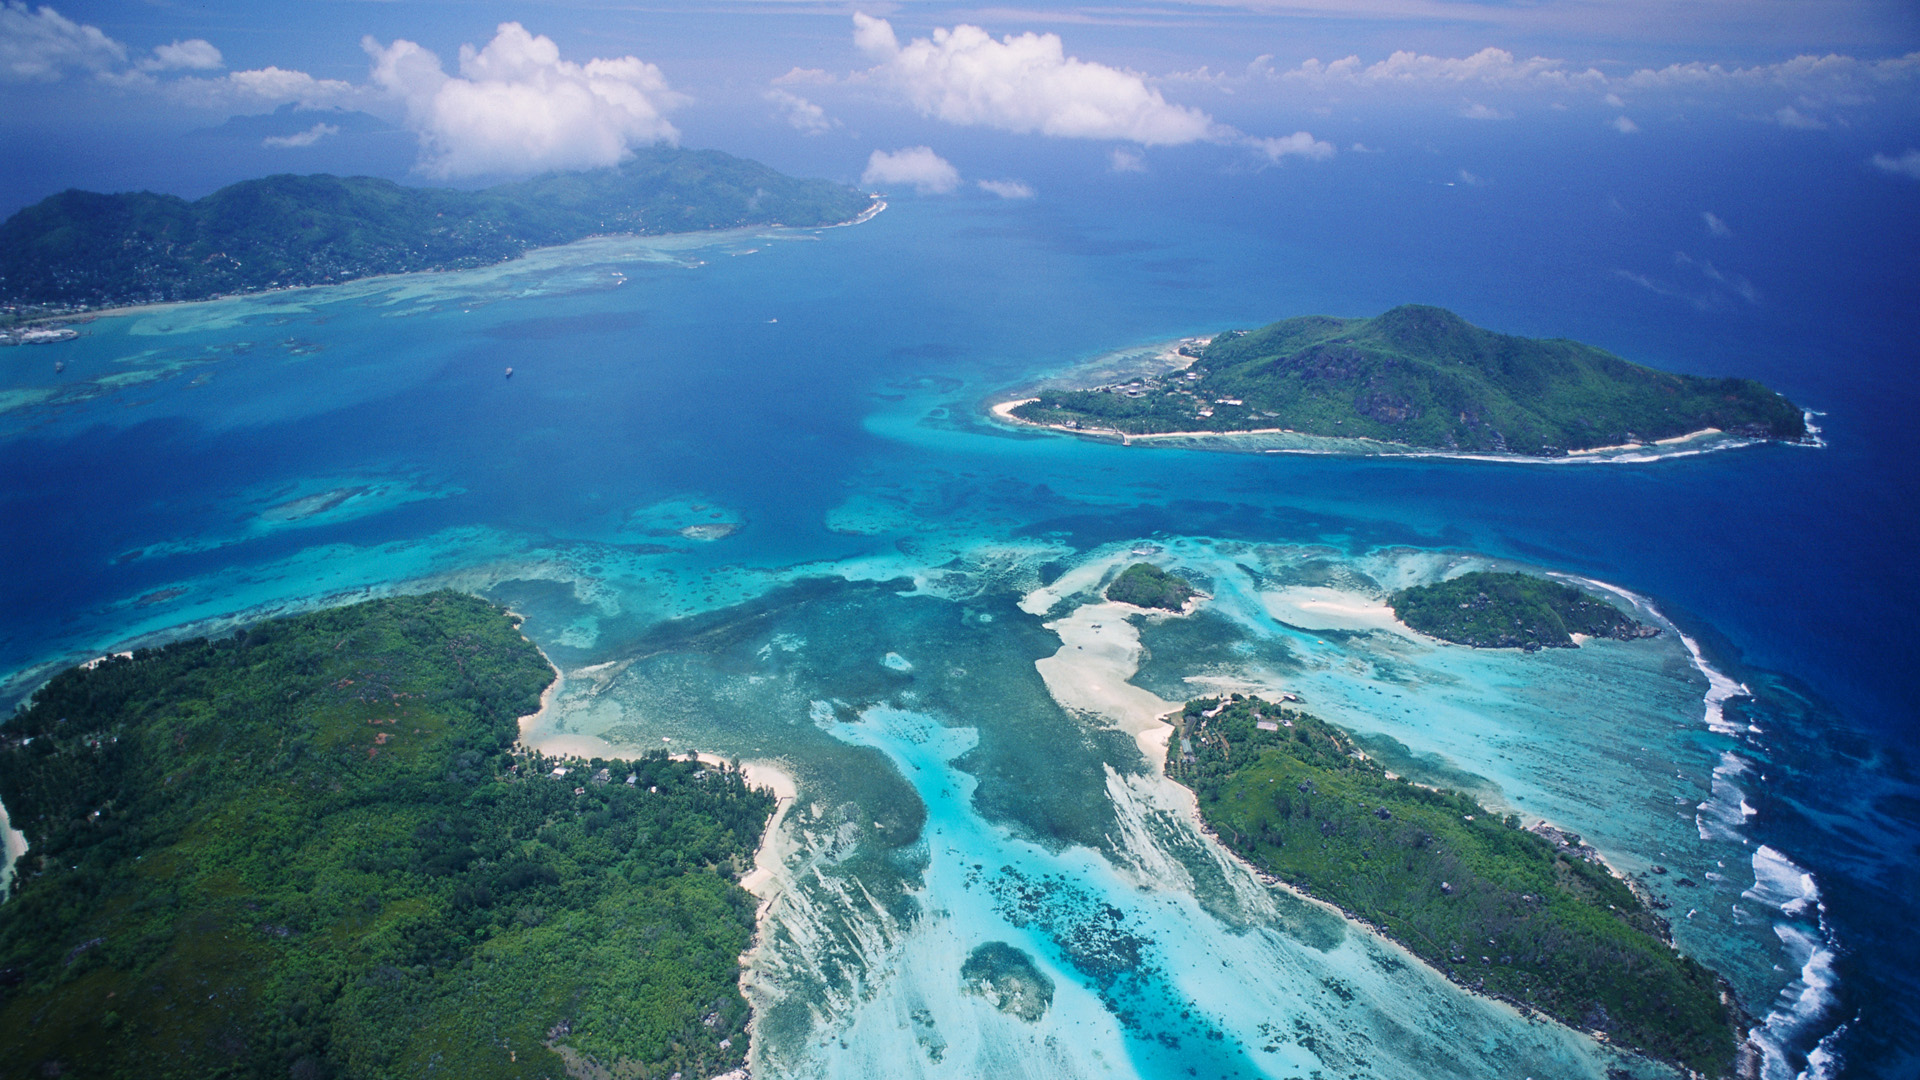 Aerial view of Seychelles Islands, Africa | Windows 10 Spotlight Images